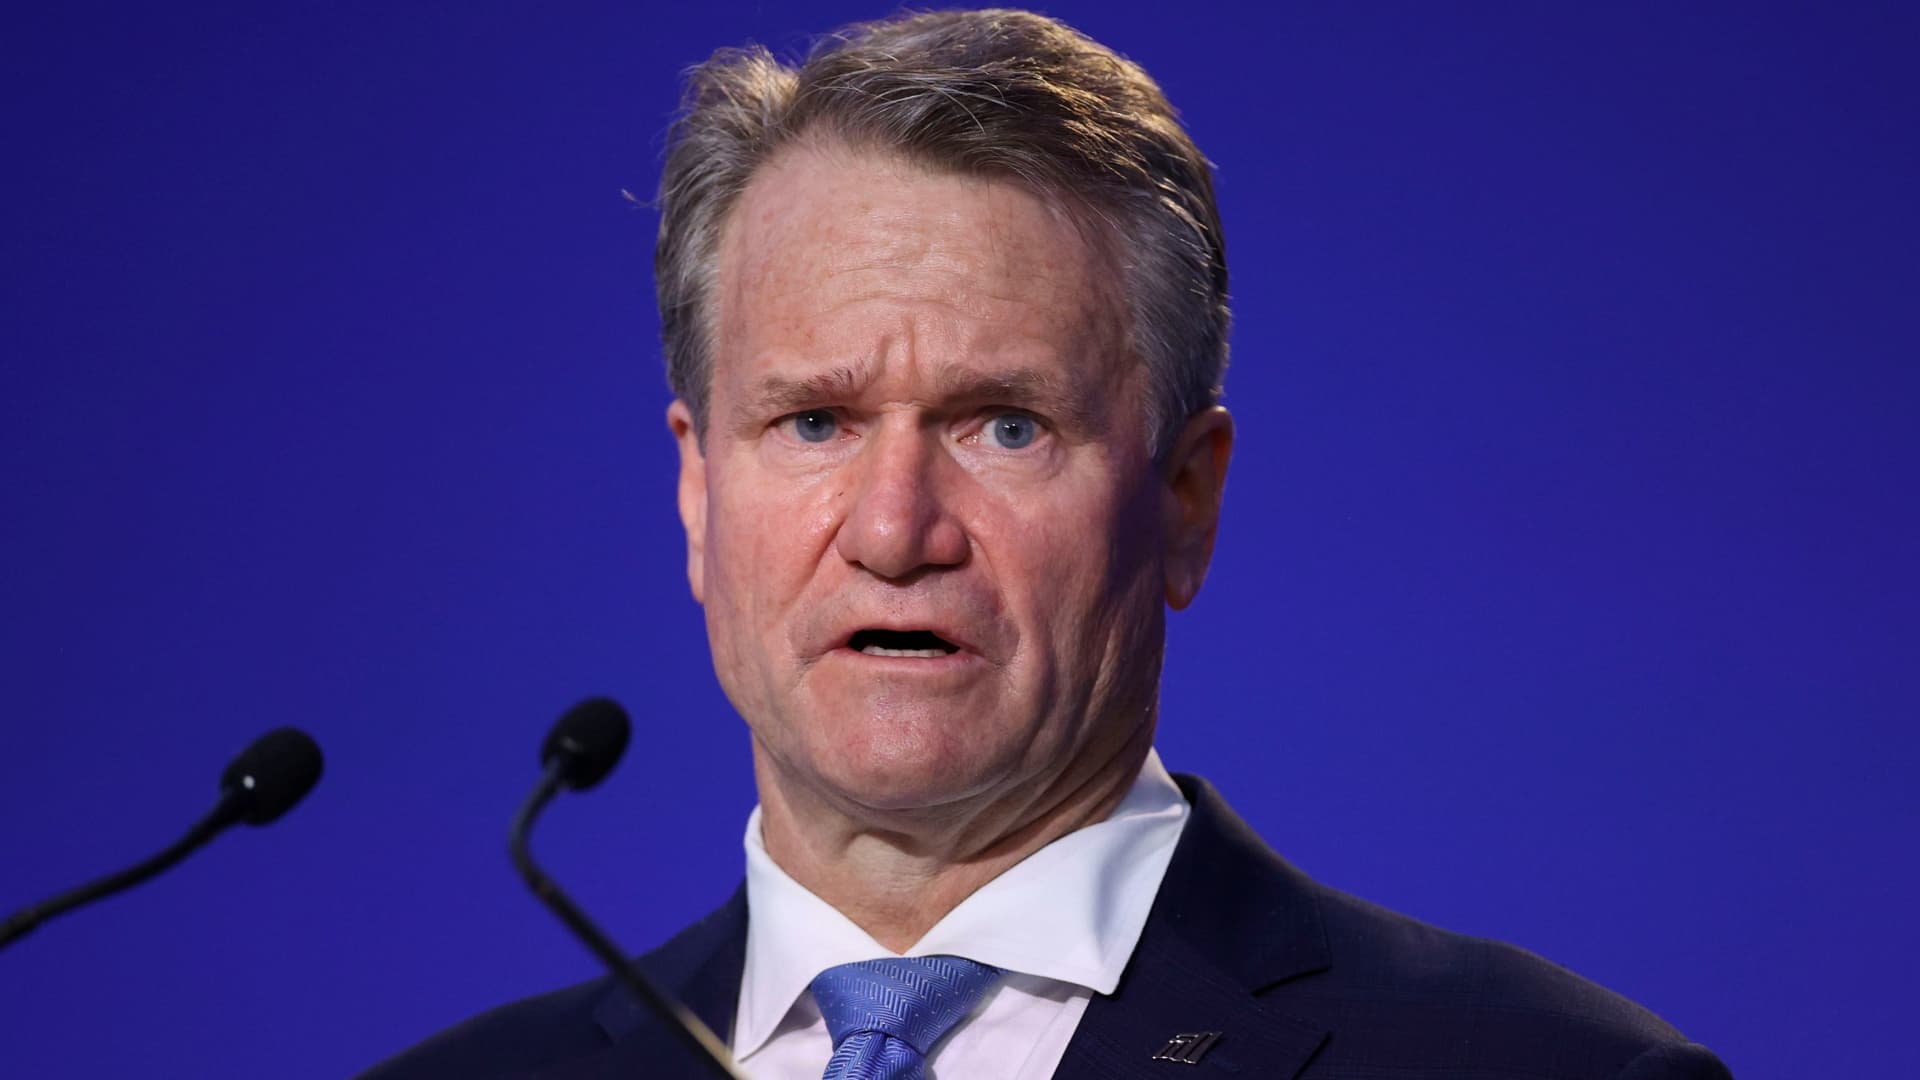 CEO and Chairman of the Bank of America Brian Moynihan speaks during the UN Climate Change Conference (COP26) in Glasgow, Scotland, Britain, November 2, 2021.